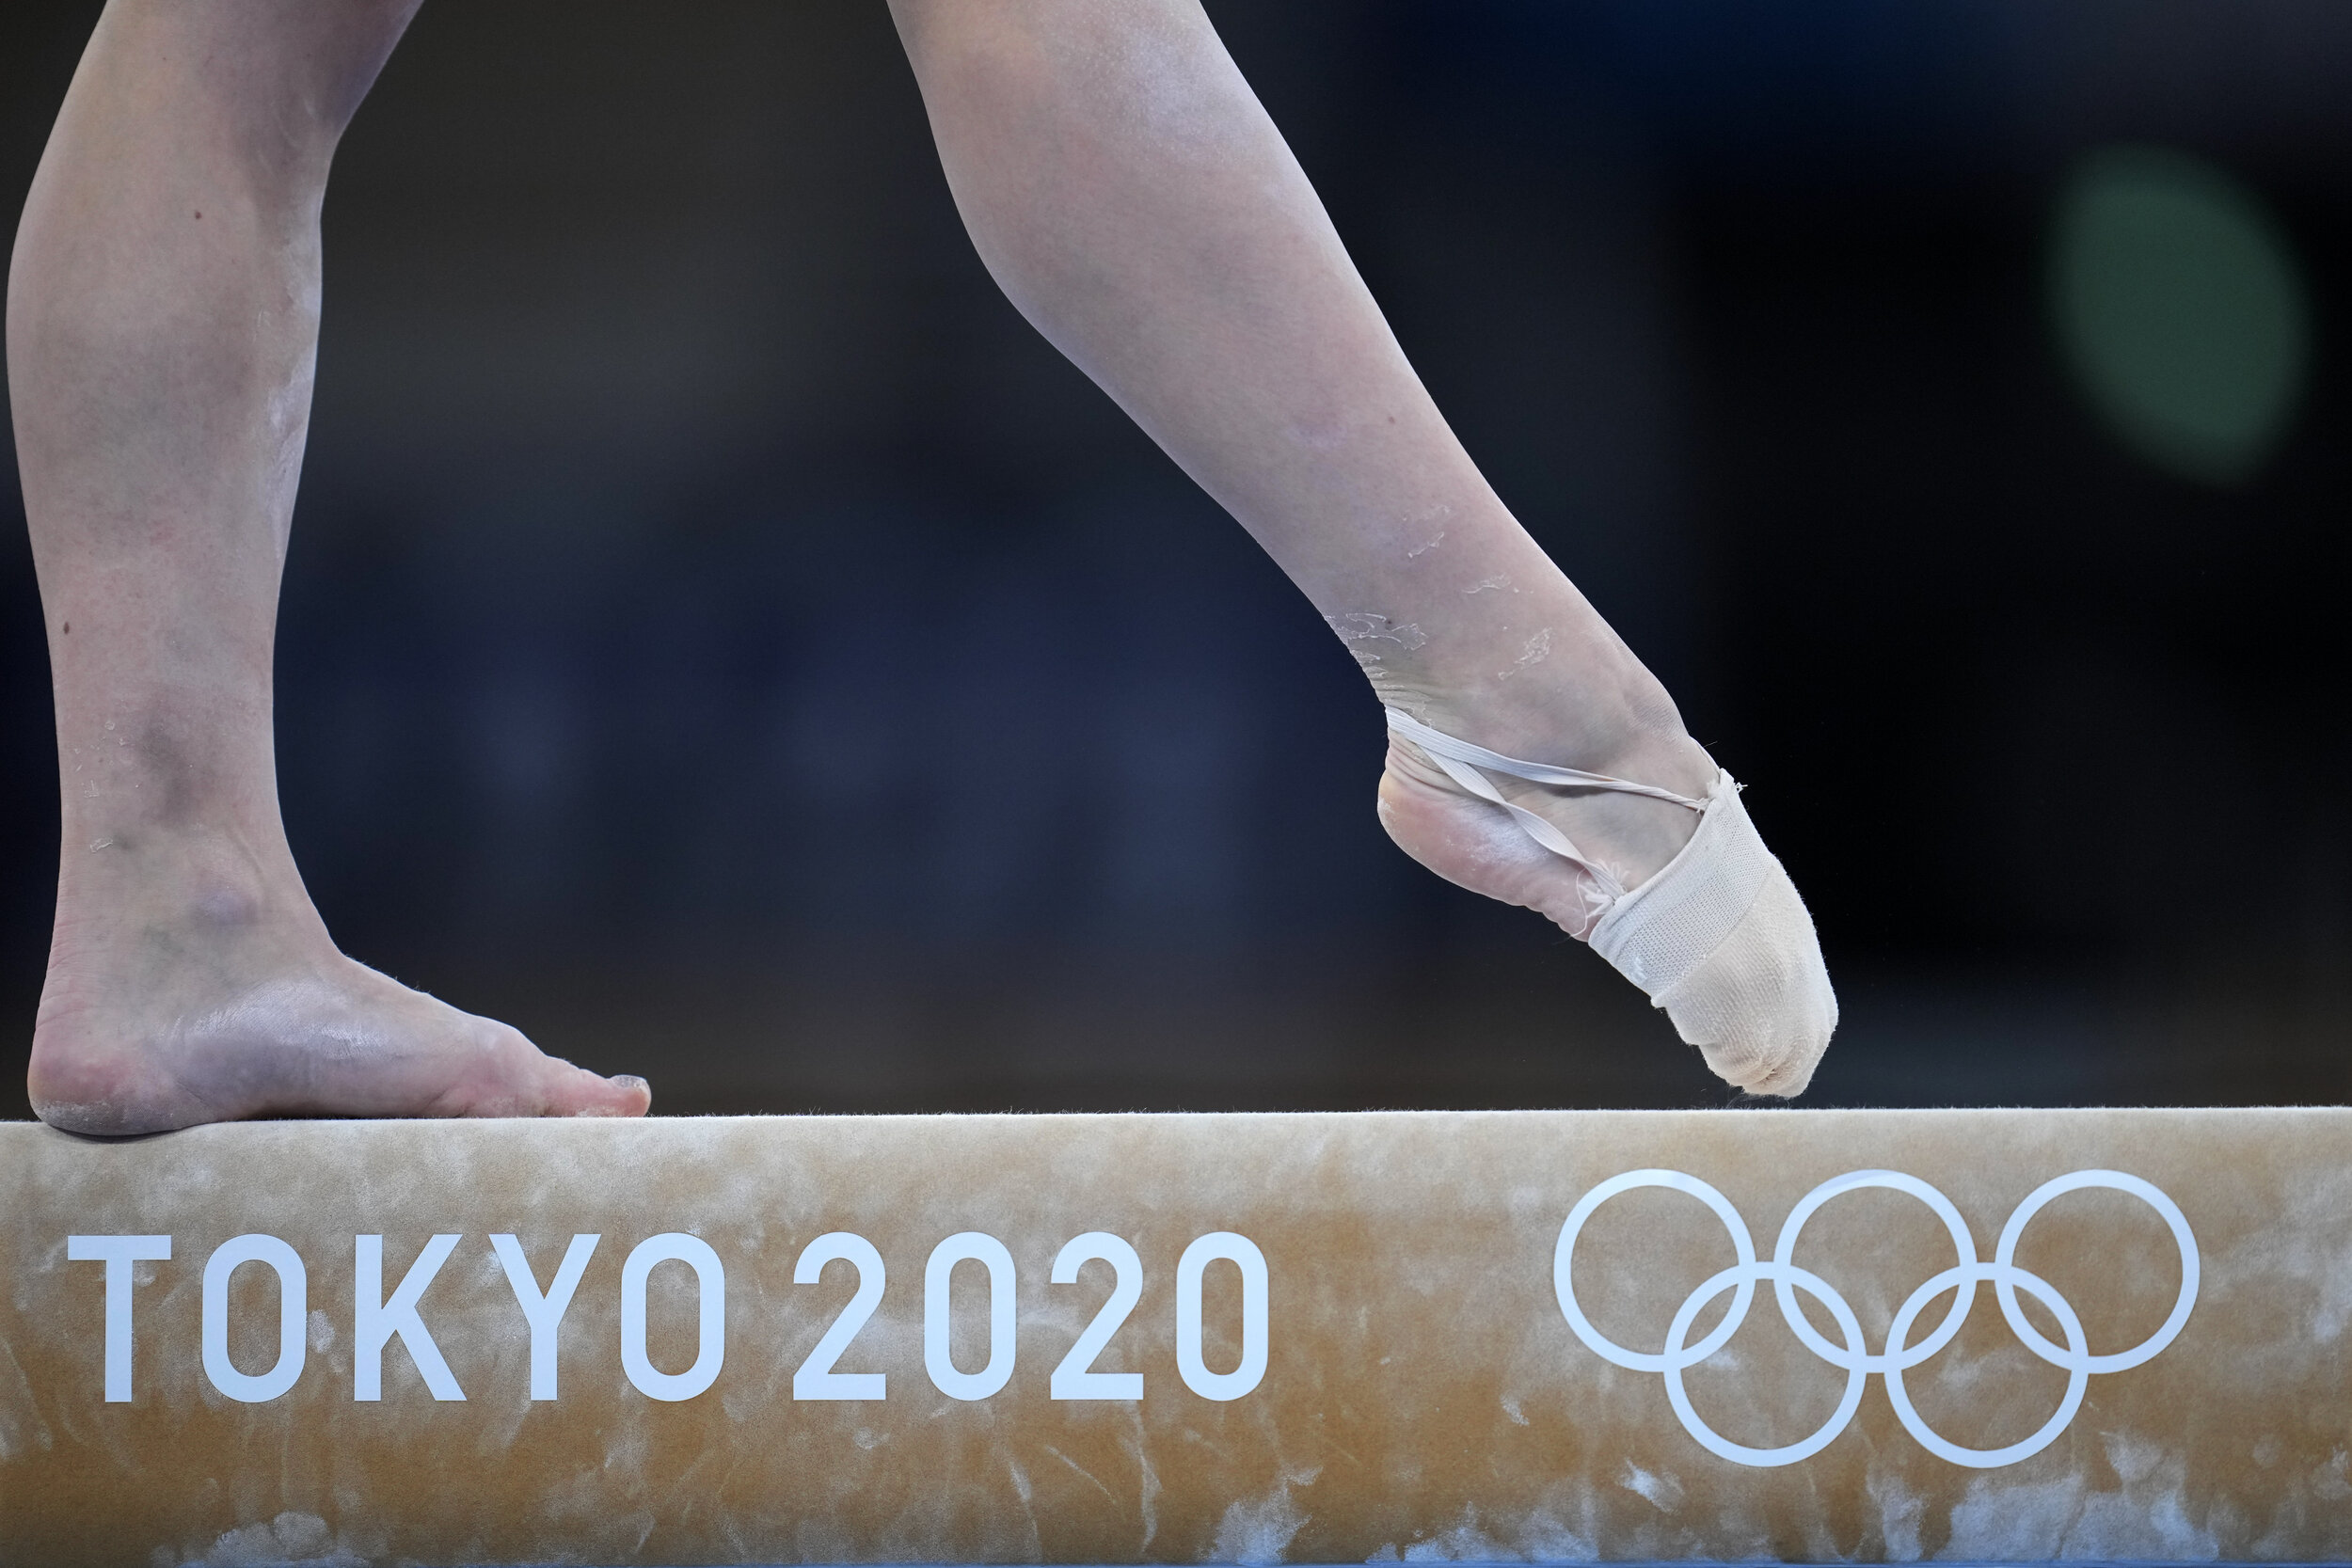  Liliia Akhaimova, of Russian Olympic Committee, performs on the balance beam during the women's artistic gymnastic qualifications at the 2020 Summer Olympics, Sunday, July 25, 2021, in Tokyo. (AP Photo/Natacha Pisarenko) 